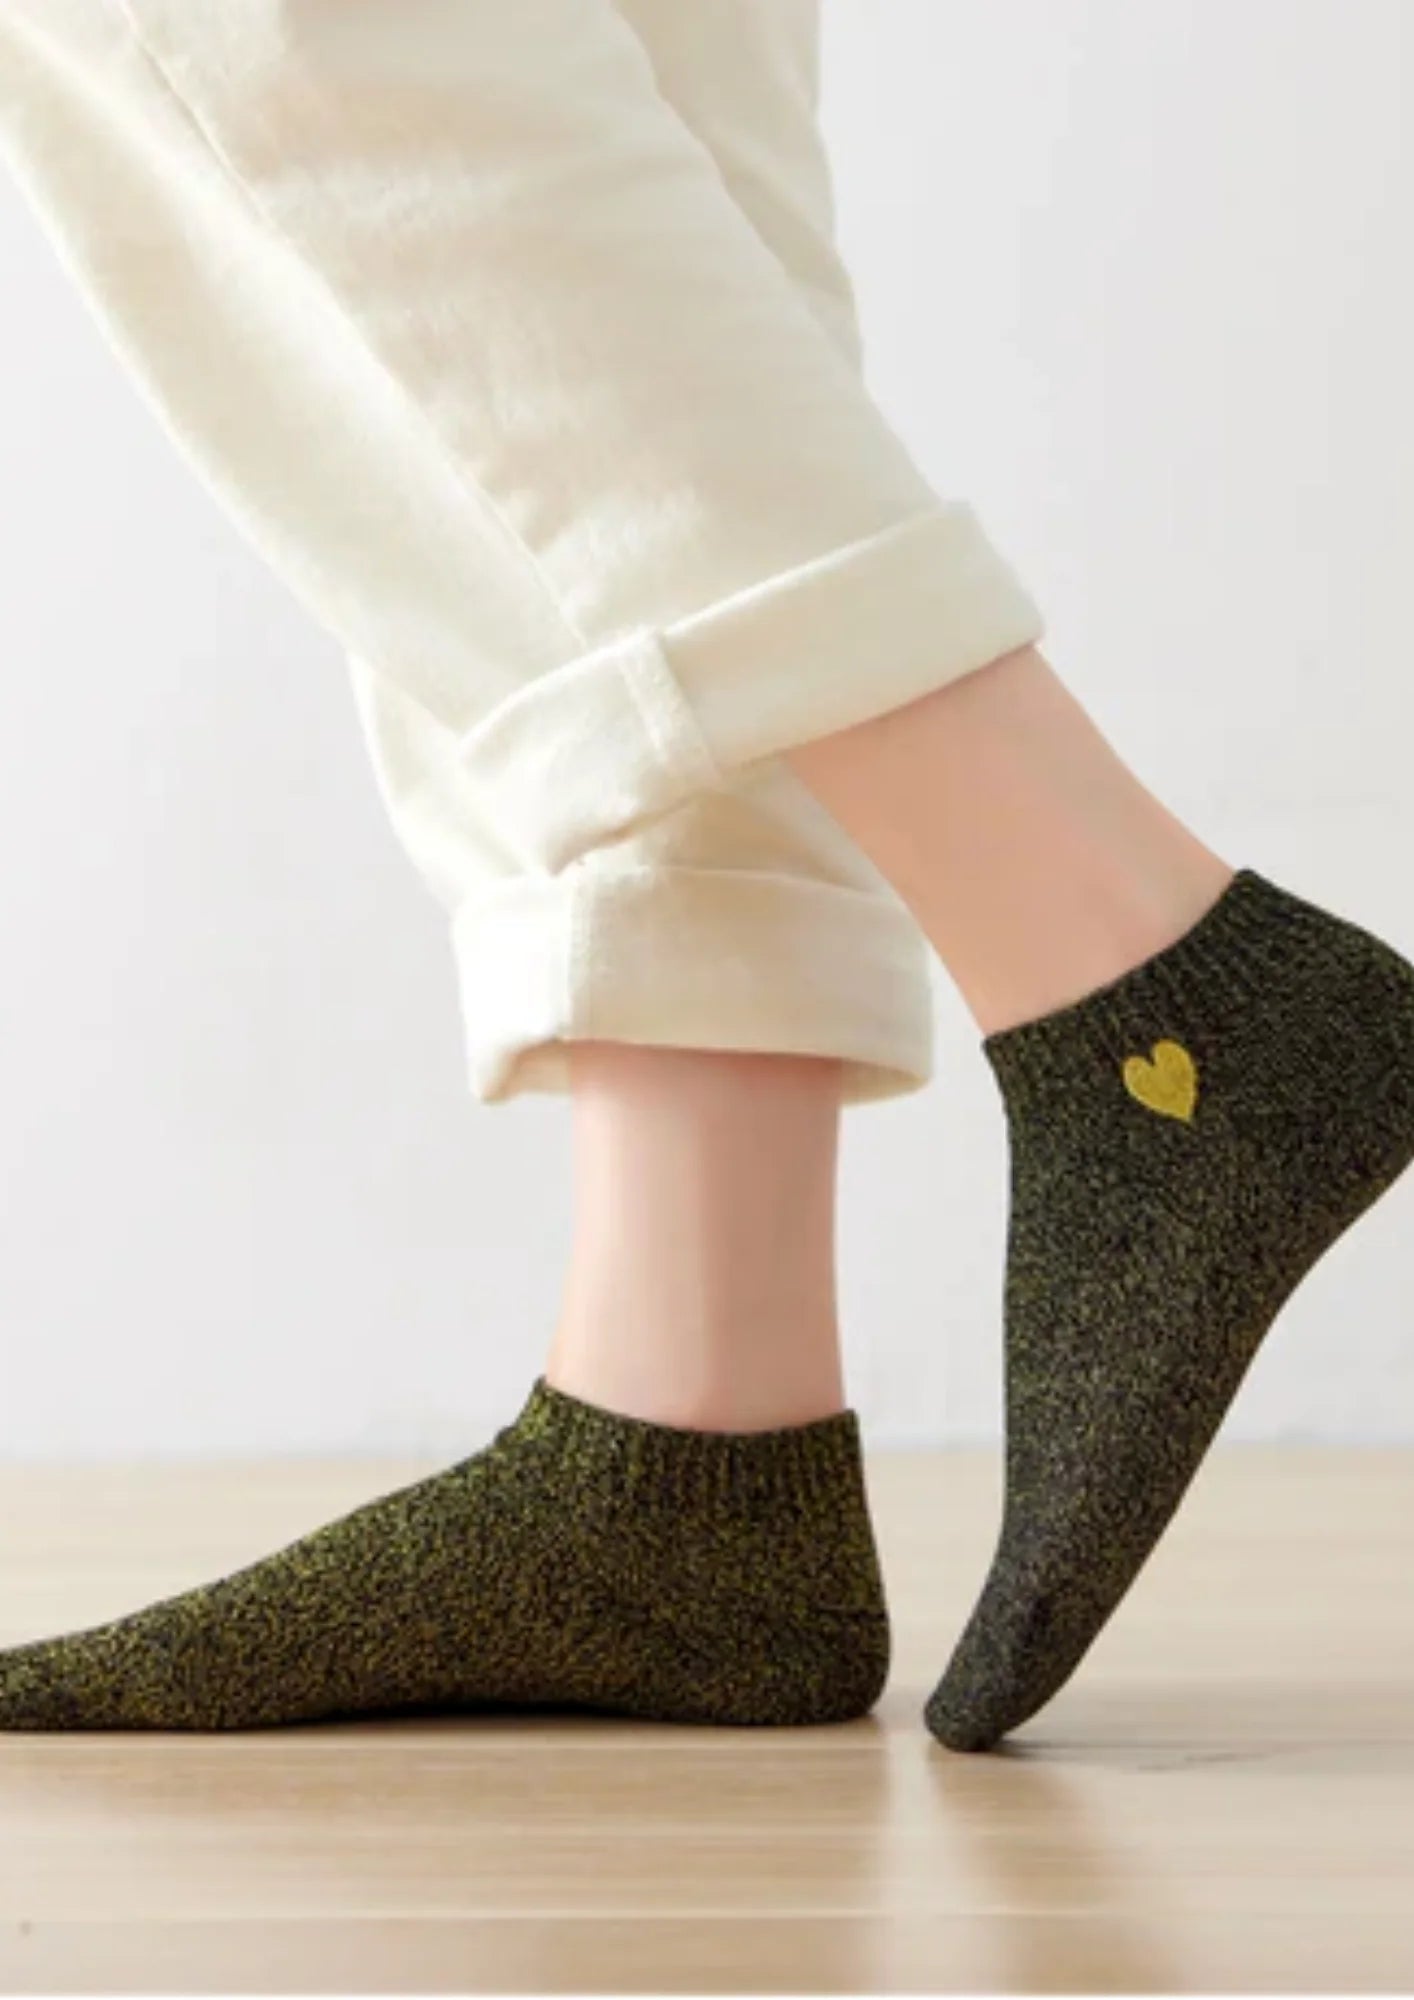 SPARKLY GREEN SOCKS WITH GOLDEN HEART DETAIL